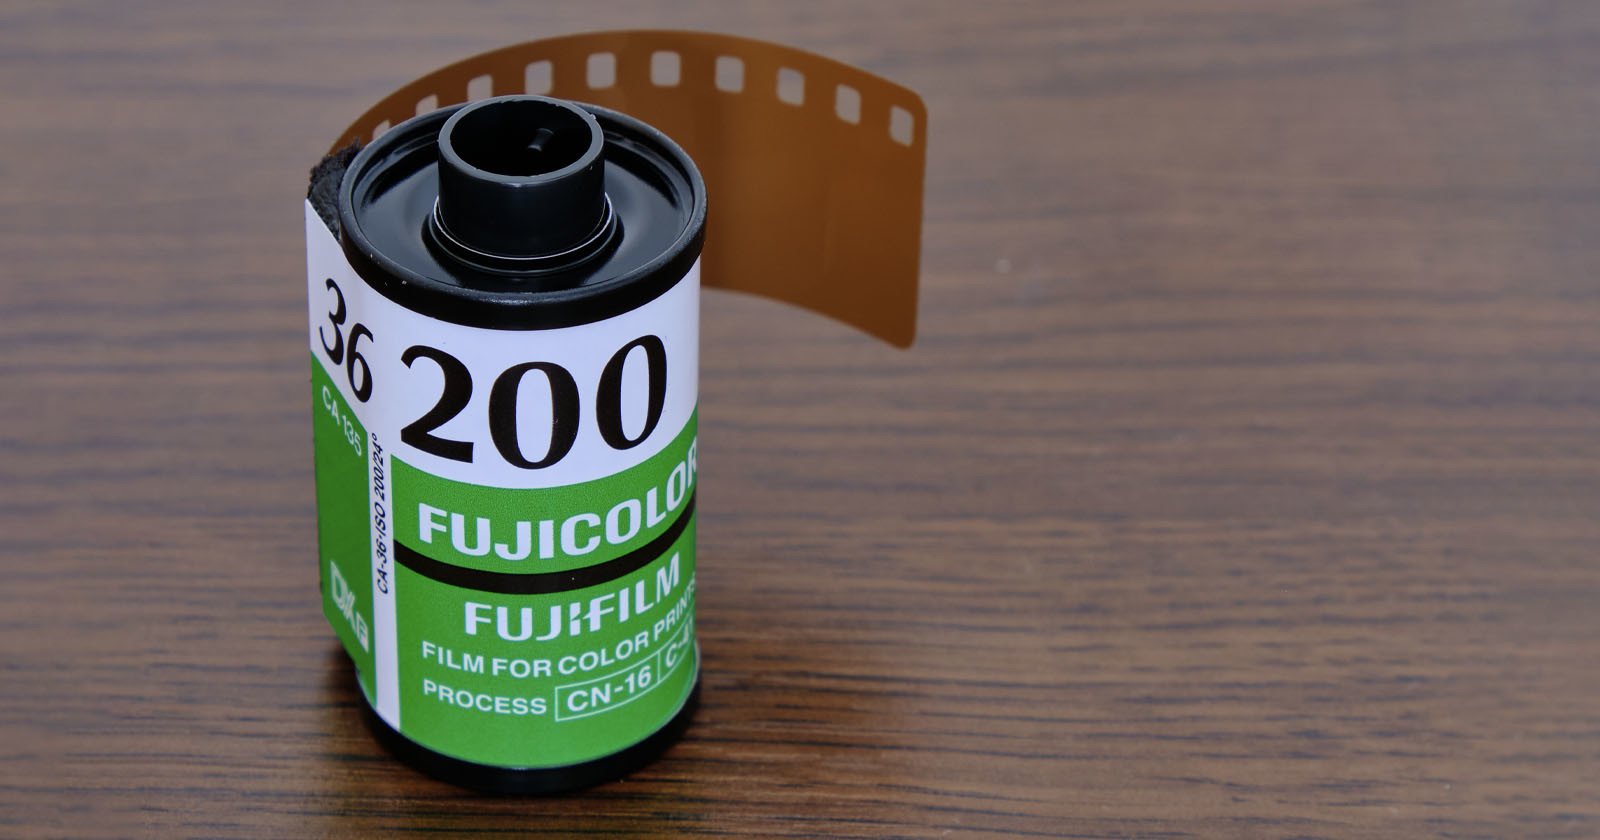  fujifilm only increase film prices north america 